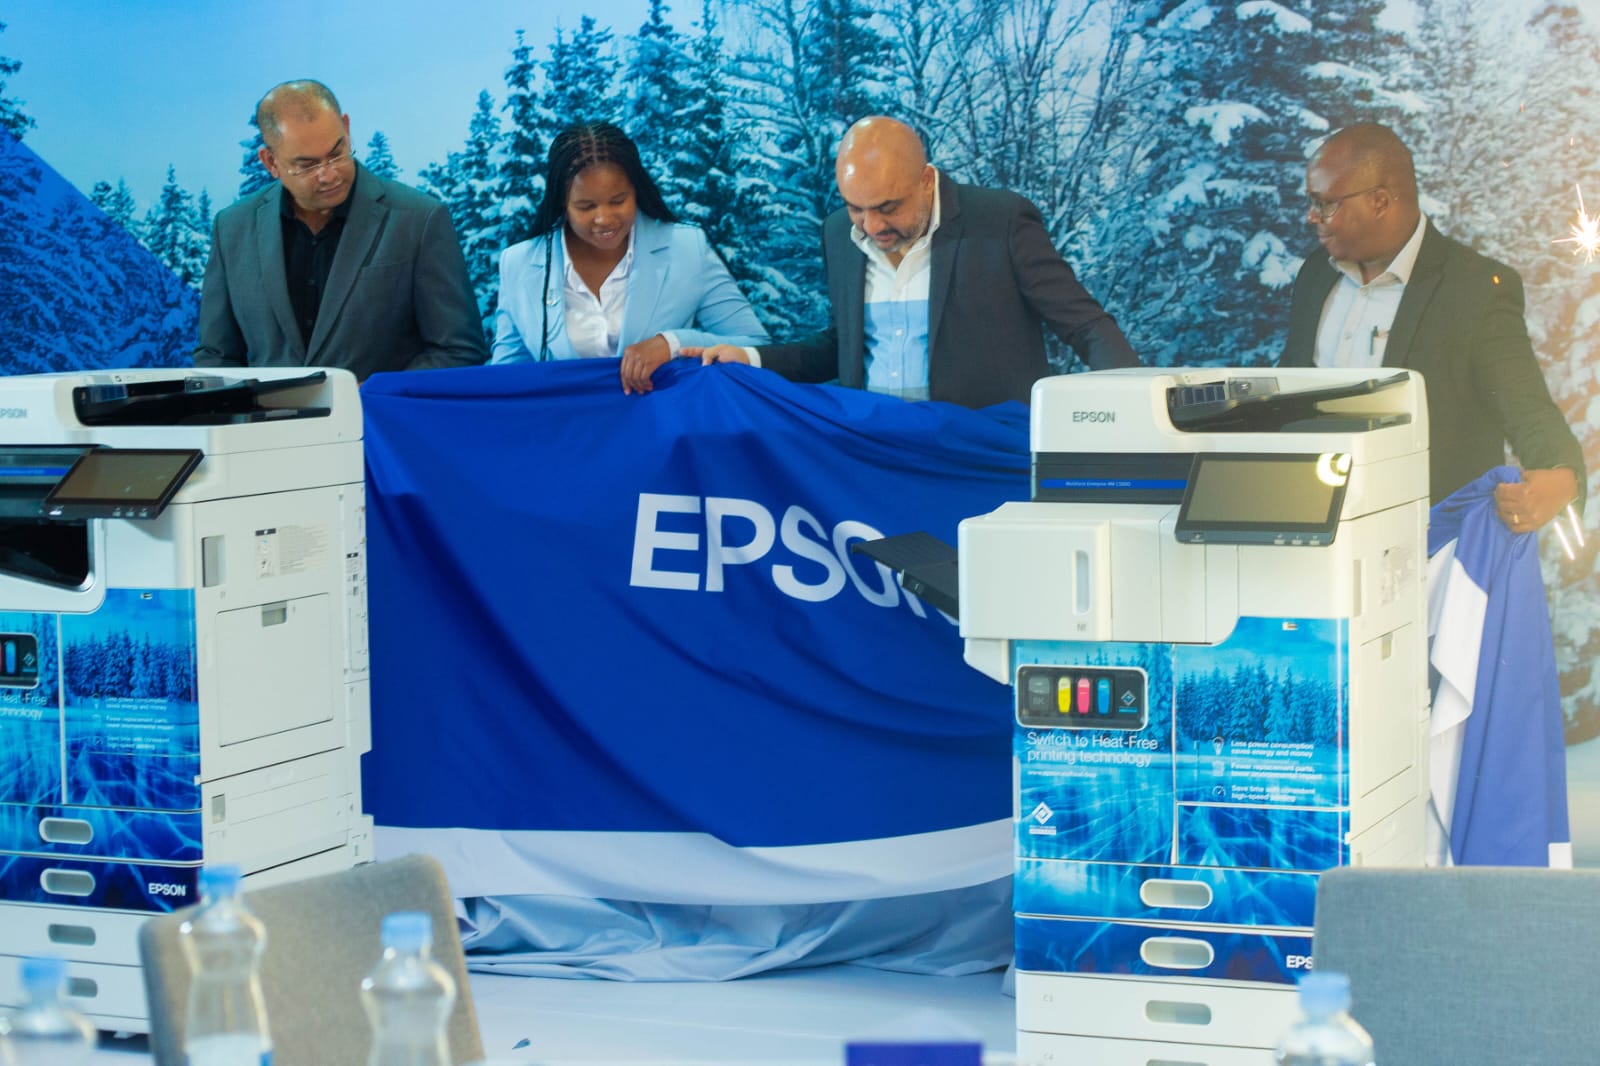 Epson has announced the introduction of the WorkForce Enterprise AM-C printers to the Kenyan market